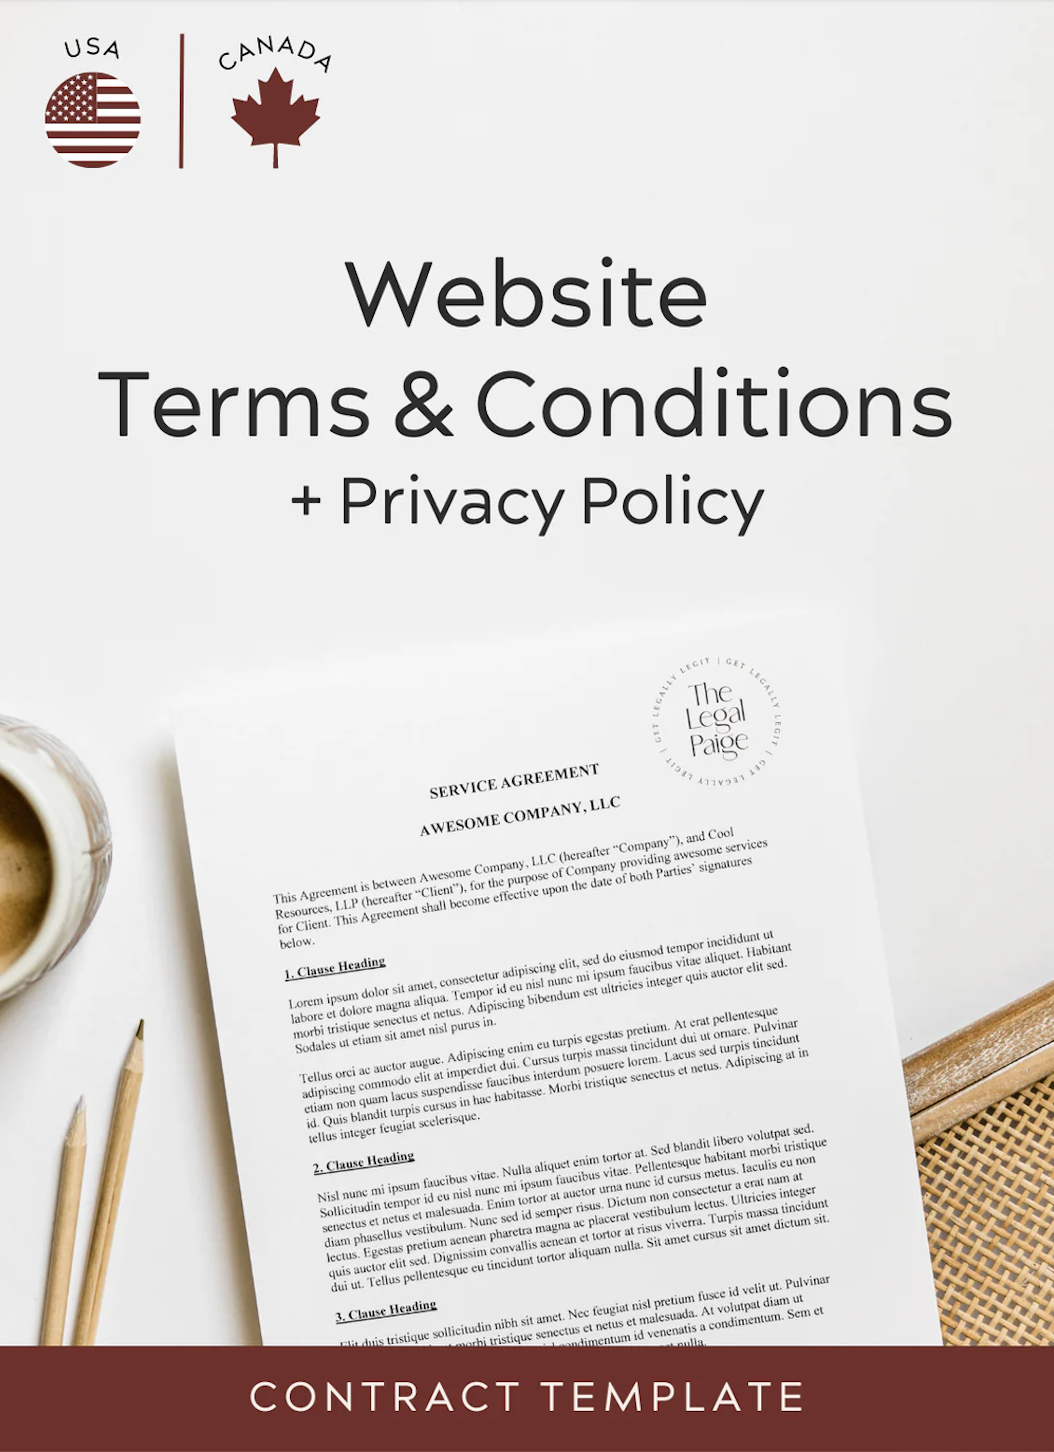 Website Terms & Conditions + Privacy Policy